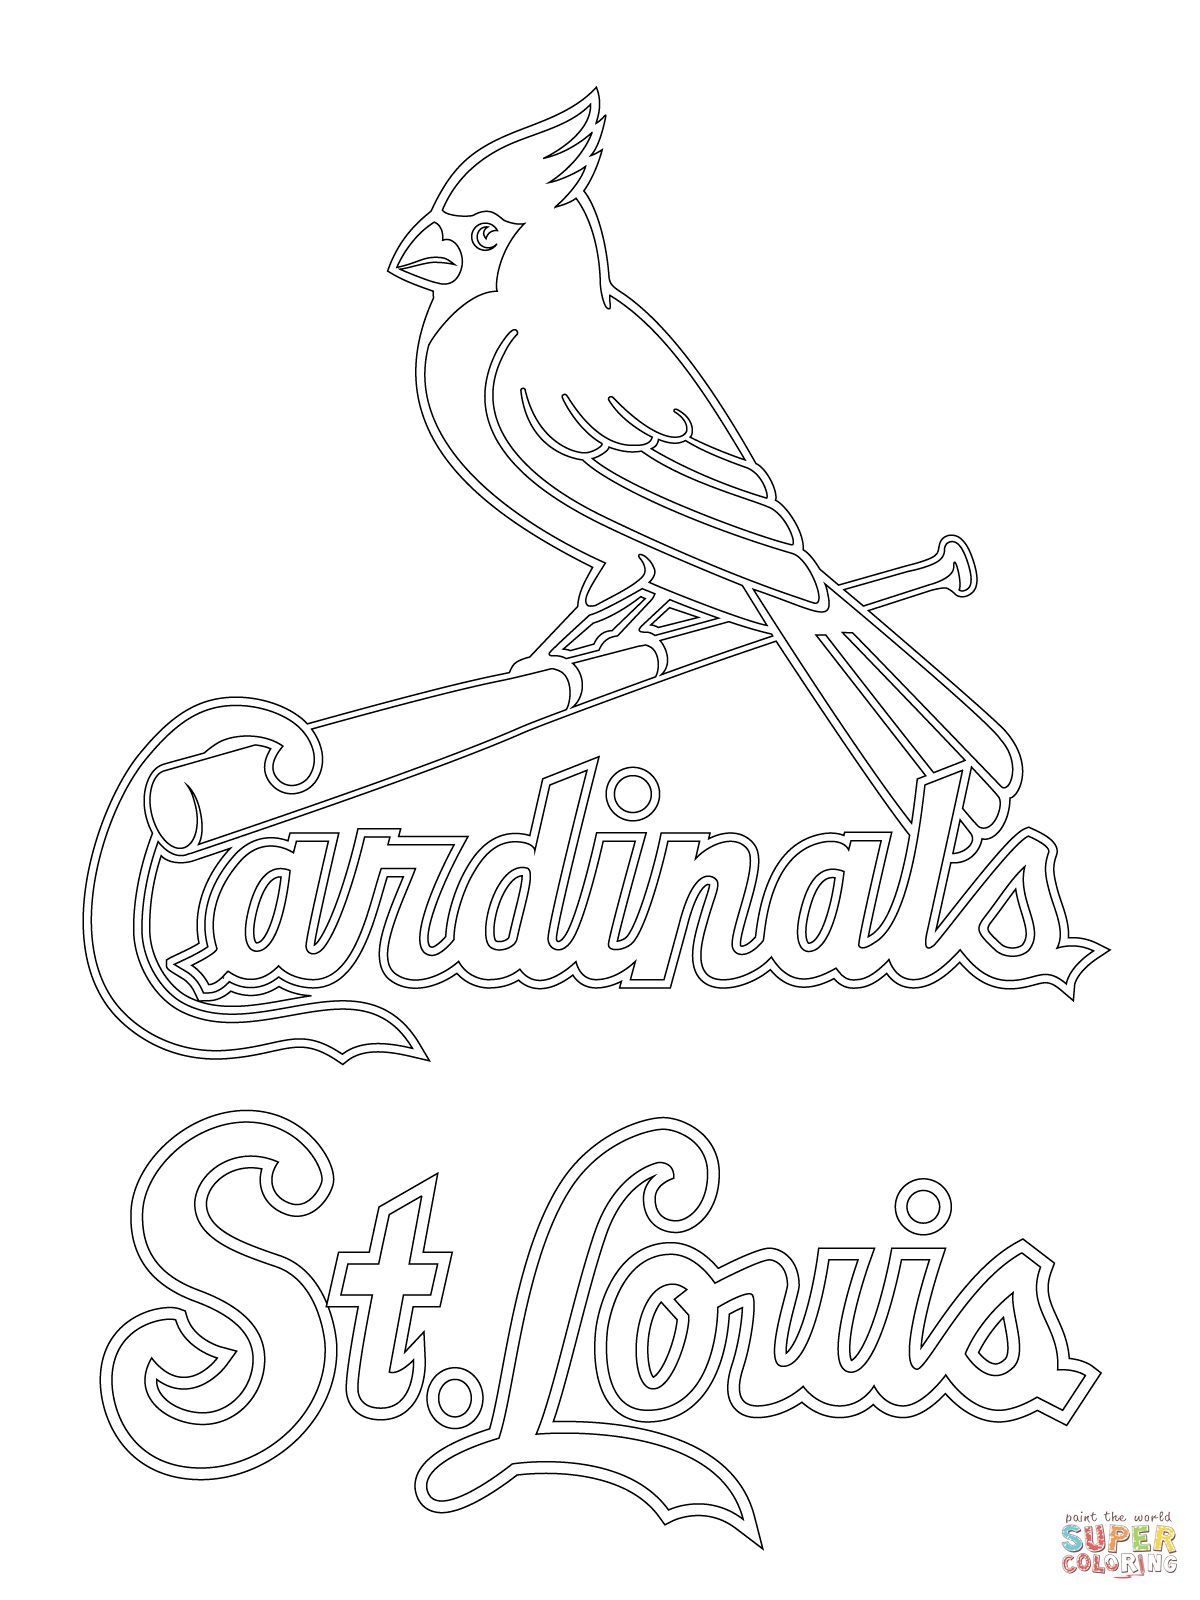 Pin by Shannon Bettes on crafts | Baseball coloring pages, St ...